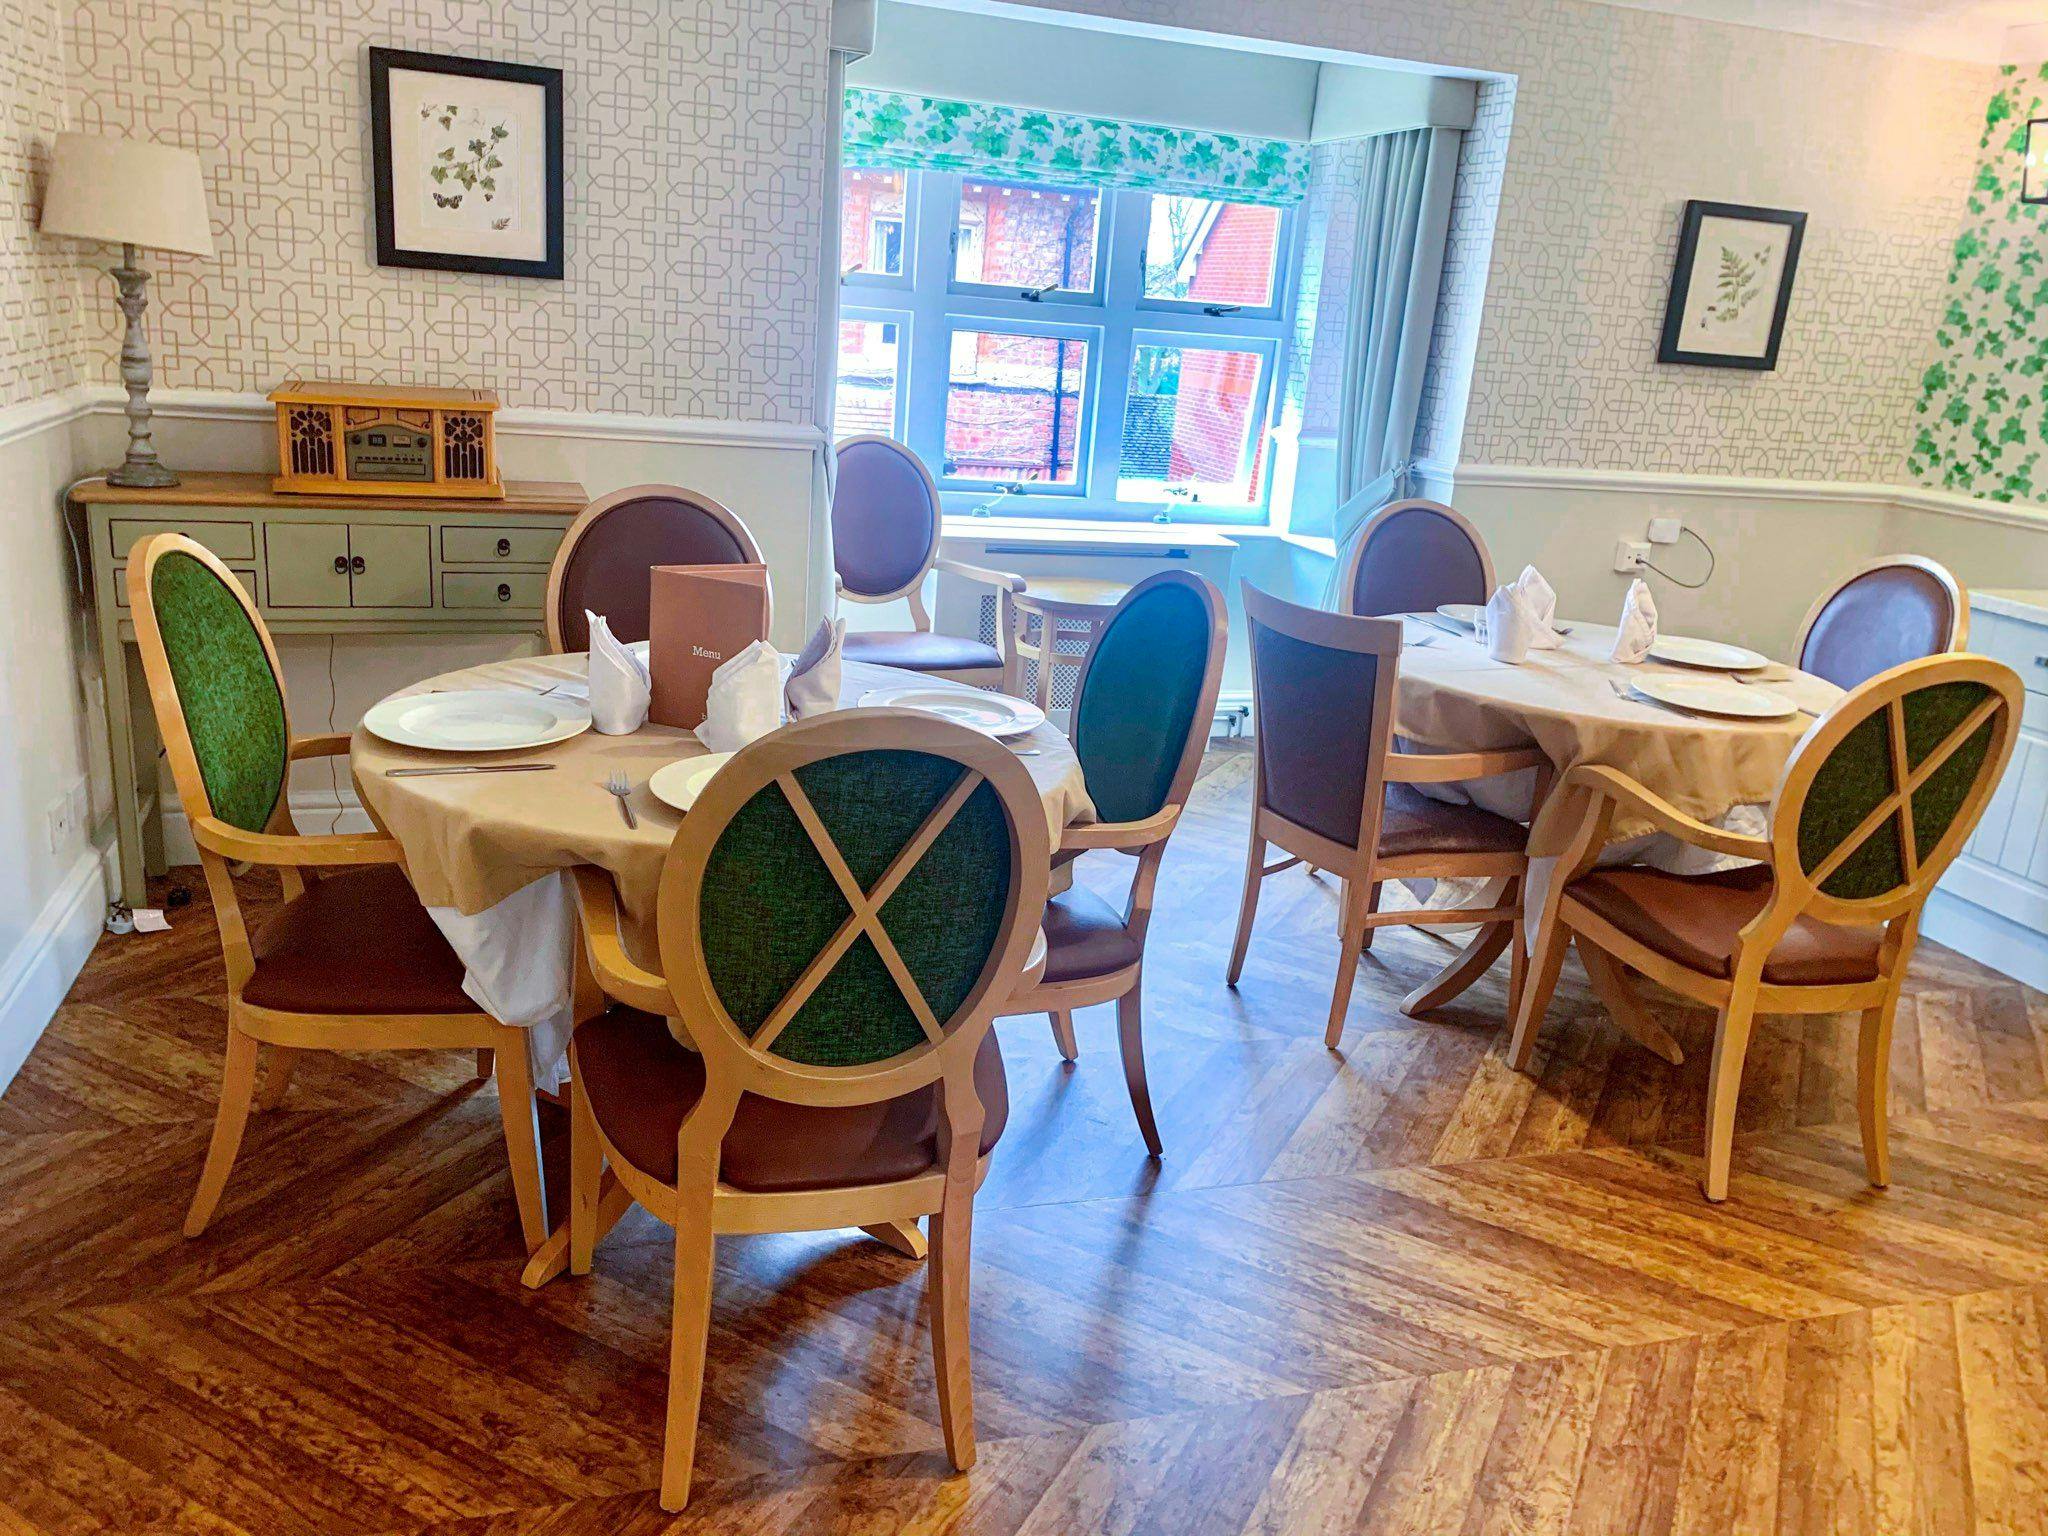 Dining Area of Hilton House Care Home Stoke-on-Trent, Staffordshire